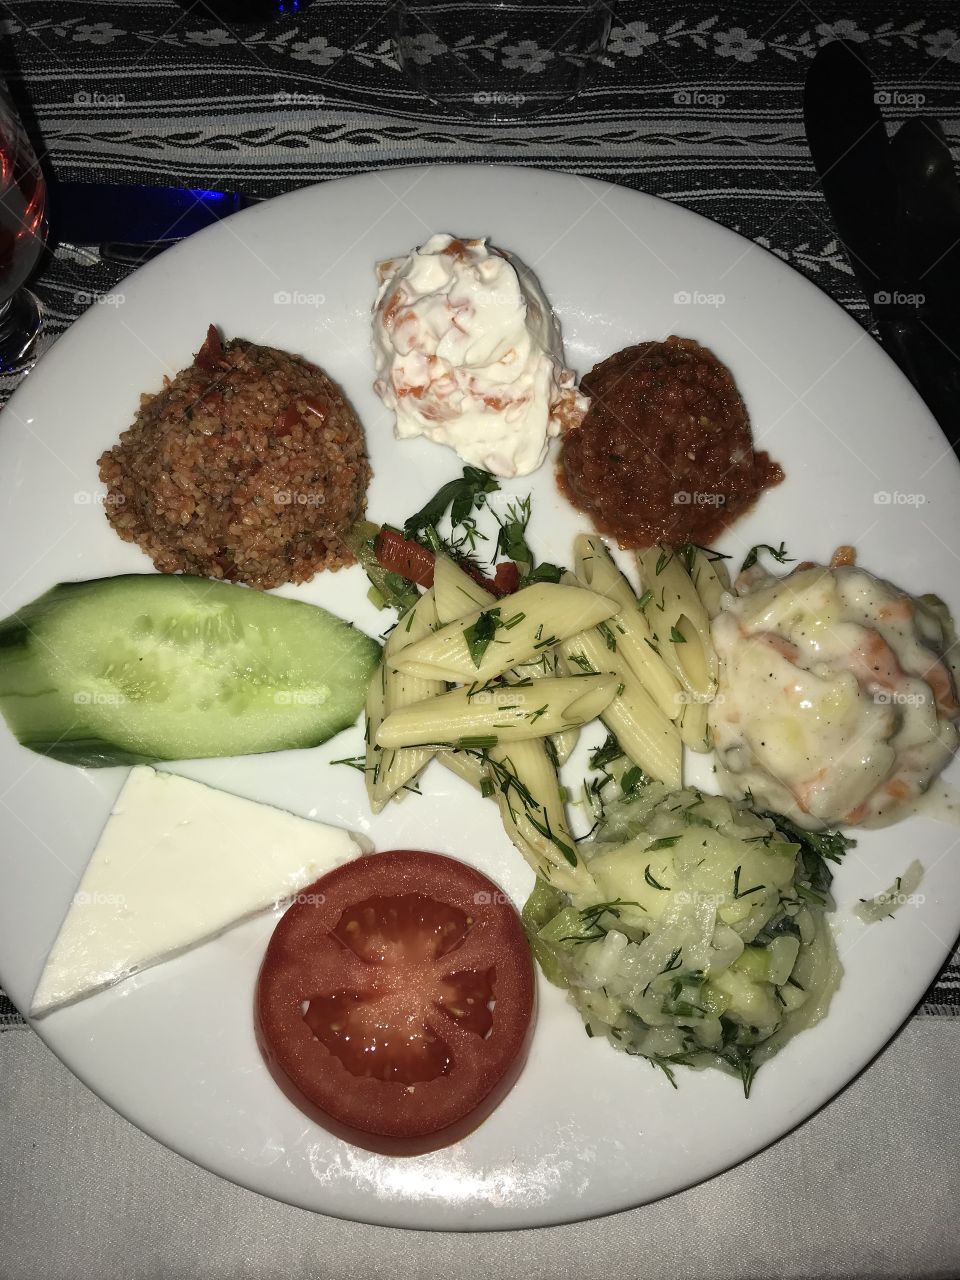 A fancy snack plate at the Turkish night in Turkey.